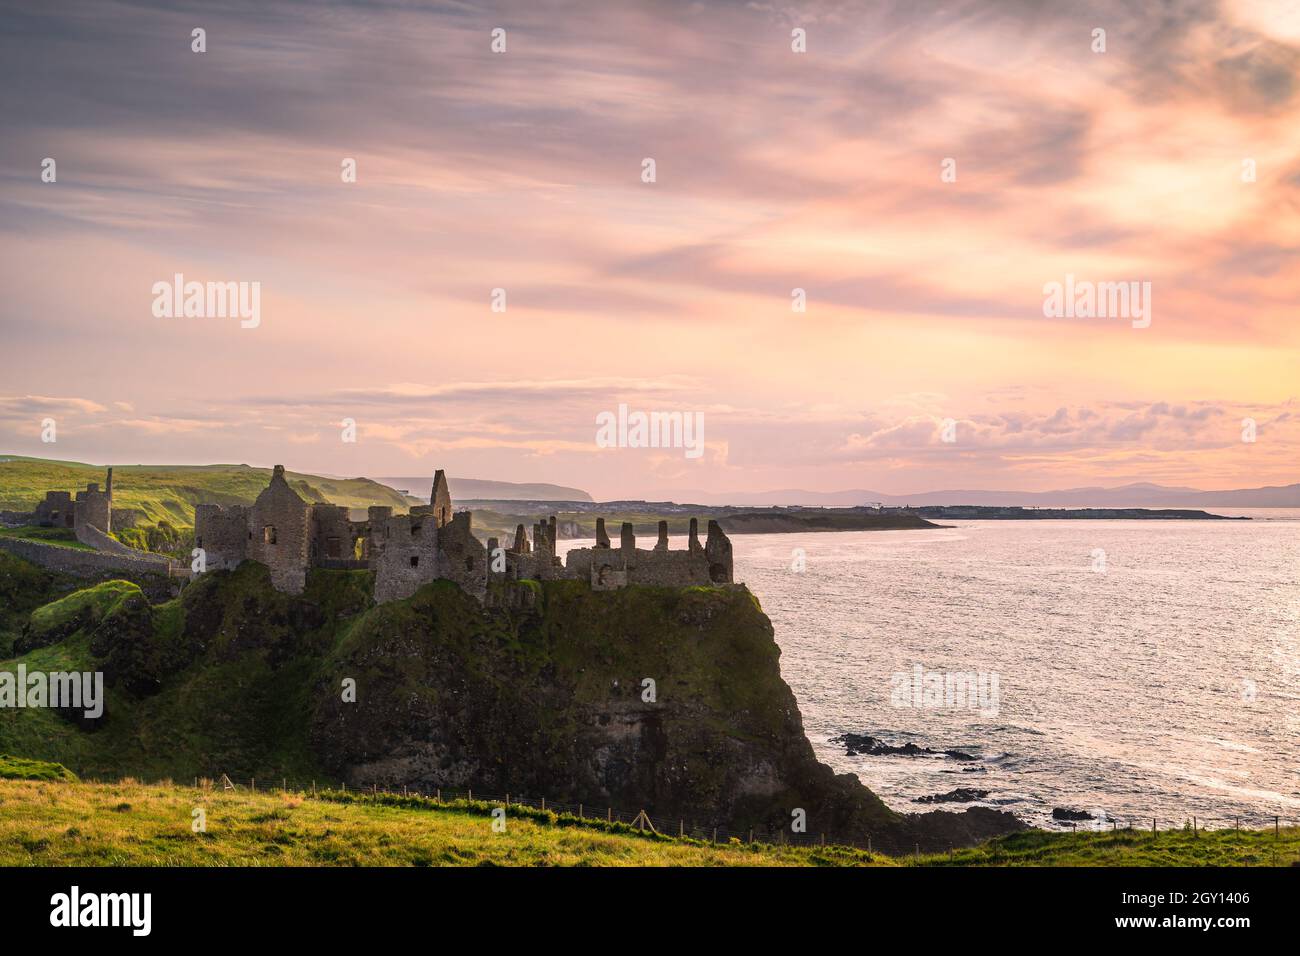 Dramatic sky over ruins of Dunluce Castle perched on the edge of cliff, Bushmills Northern Ireland Filming location of popular TV show Game of Thrones Stock Photo